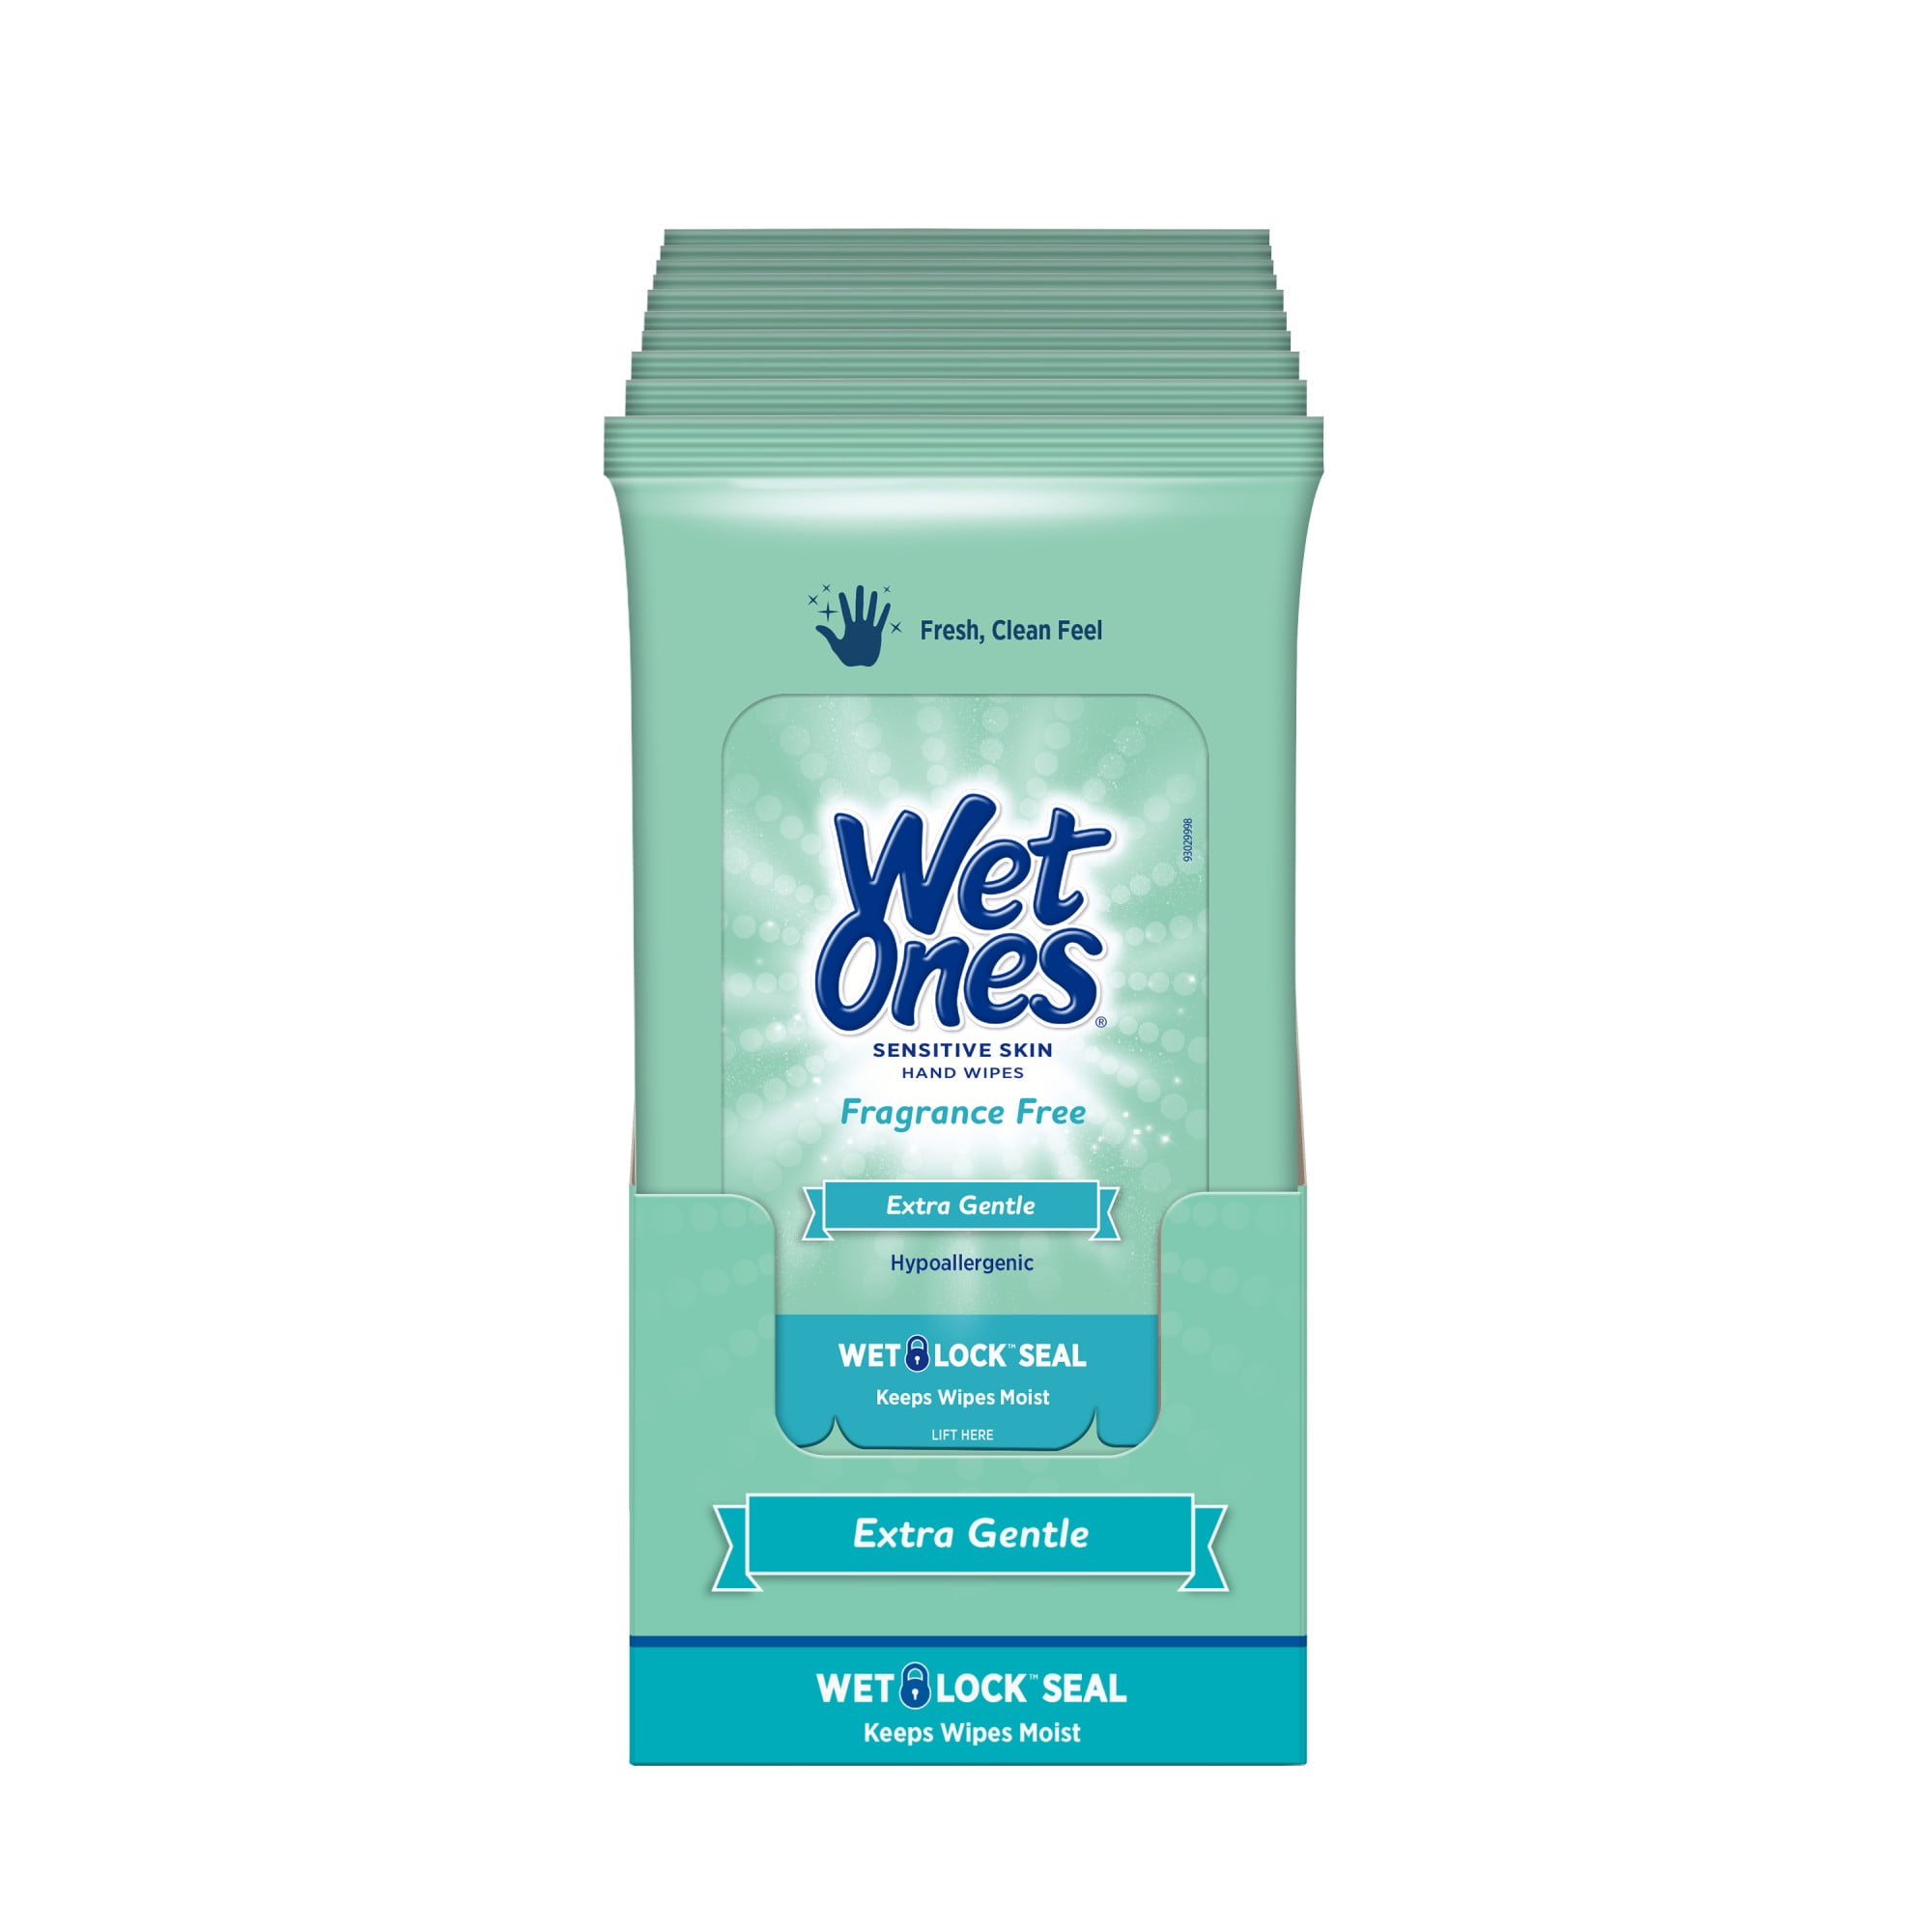 All Travel Sizes: Wholesale Wet Ones Antibacterial Single Wipes